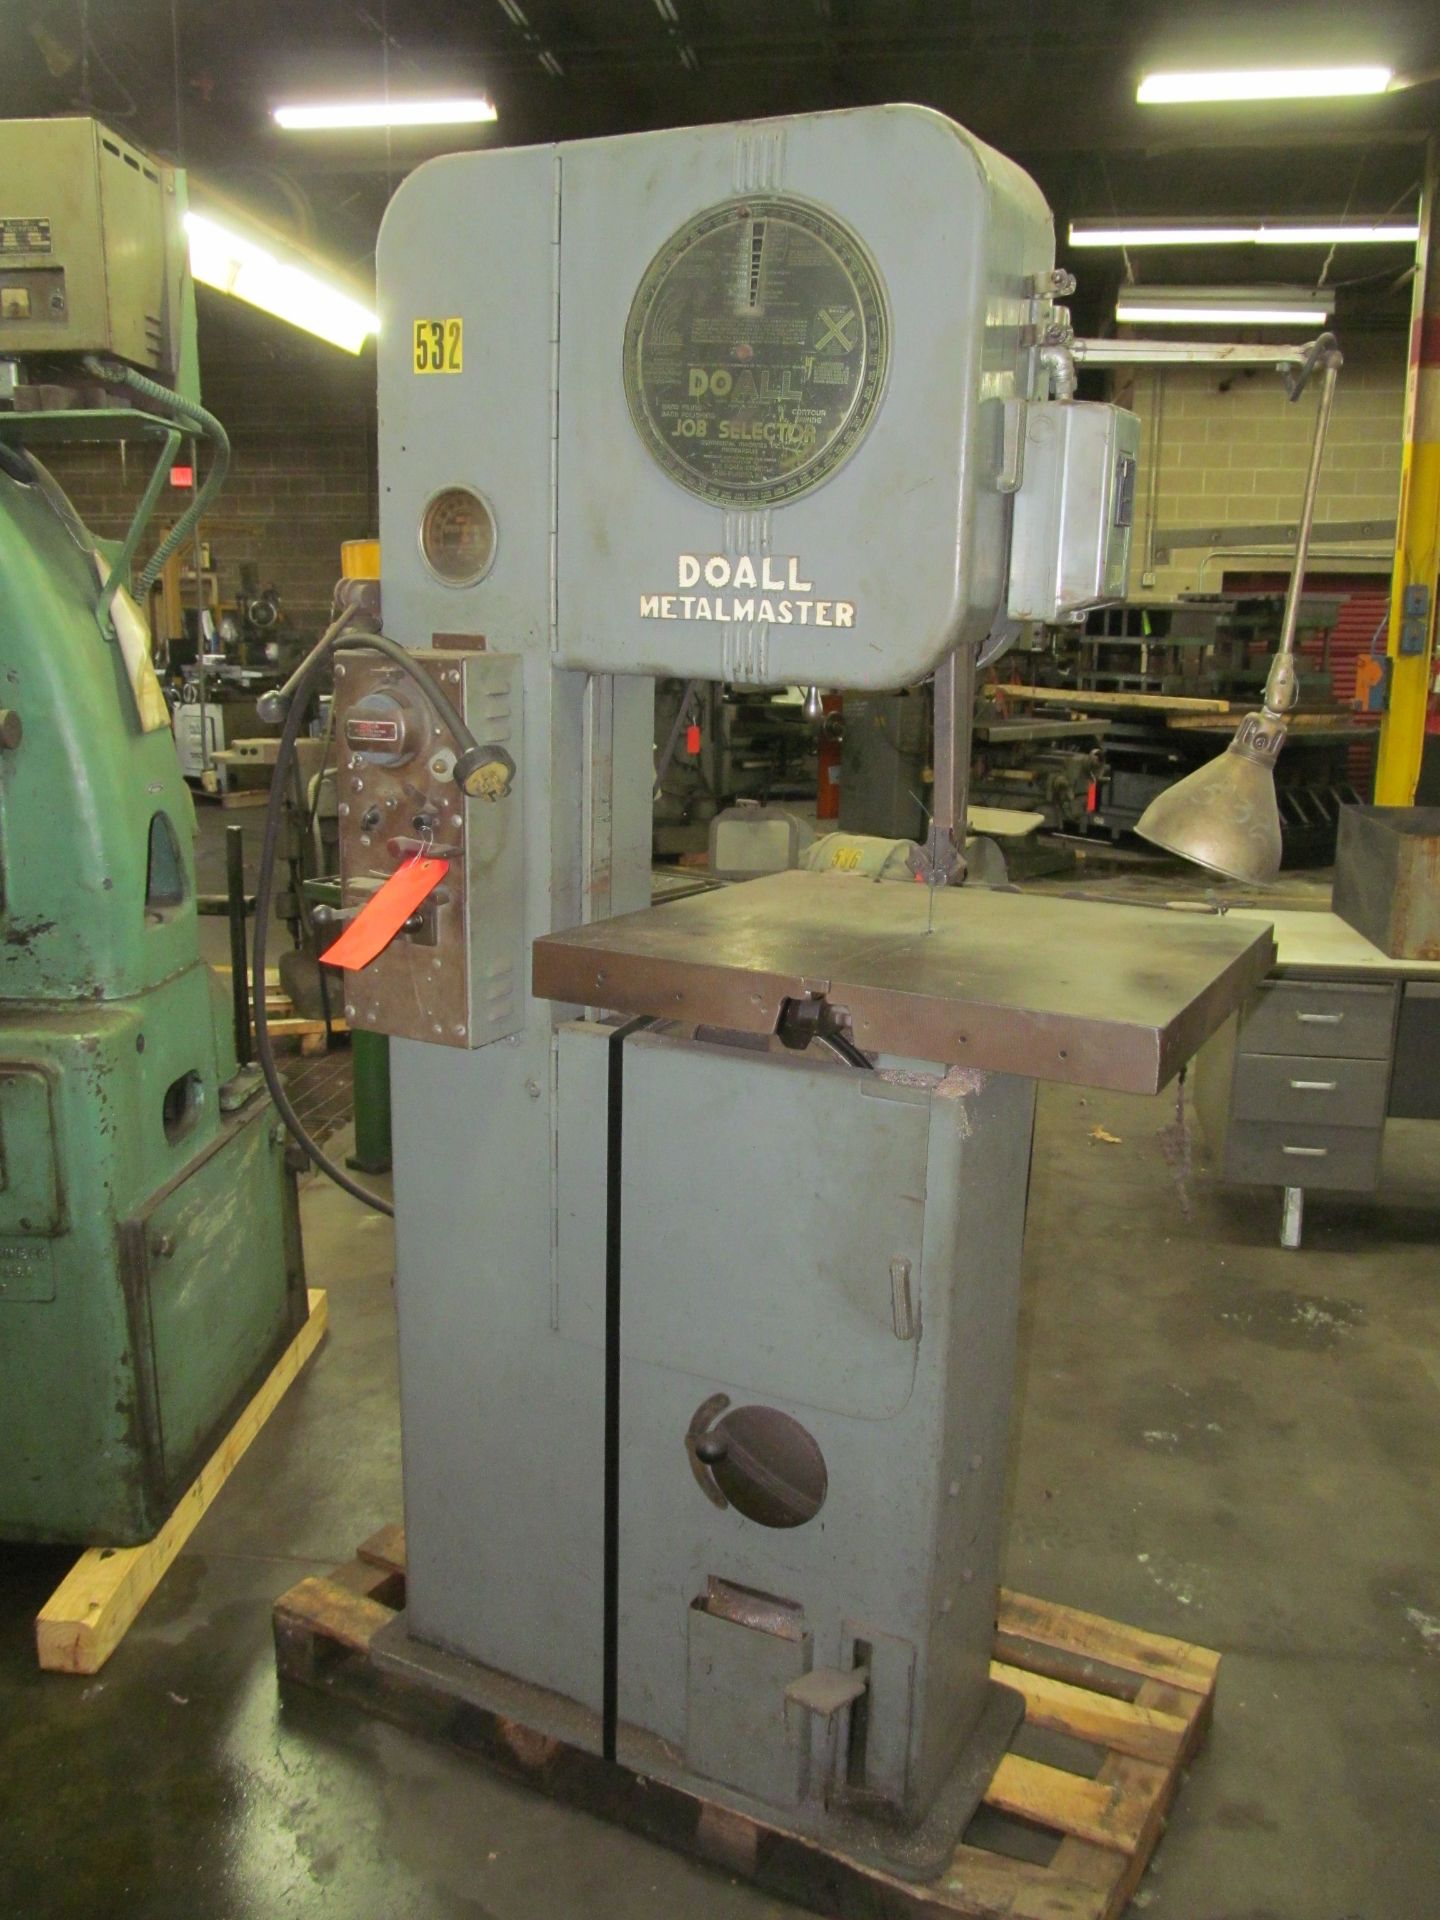 DoAll 16 in. Model Metalmaster Job Selector Tilting Table Vertical Band Saw, S/N: 423406; with Model